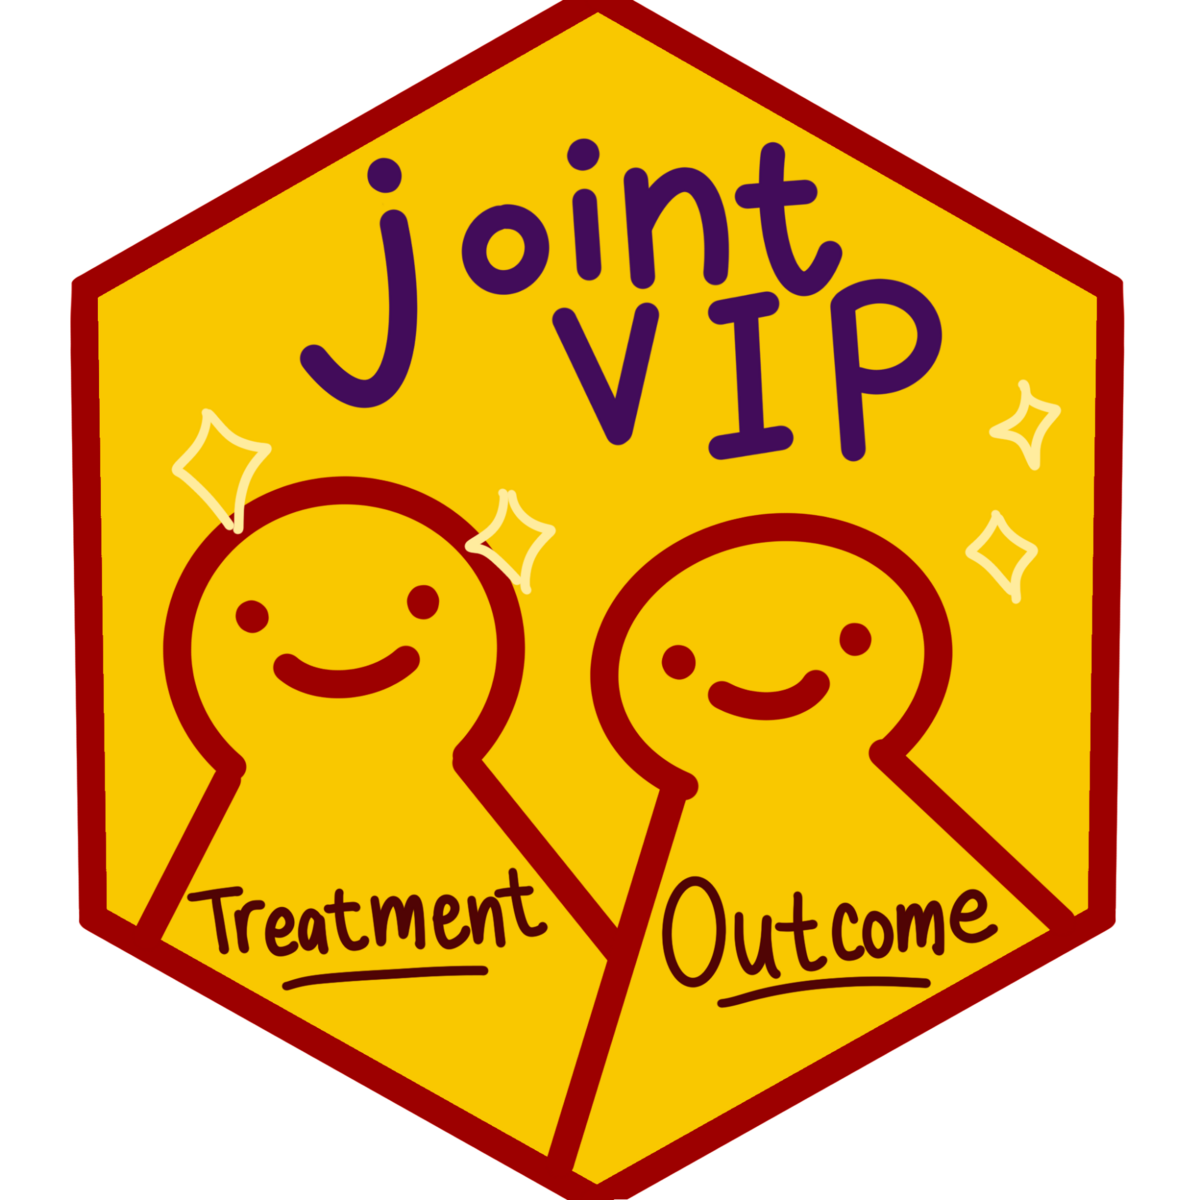 An orange badge that reads "joint VIP", with 2 characters underneath labeled "Treatment" and "Outcome".